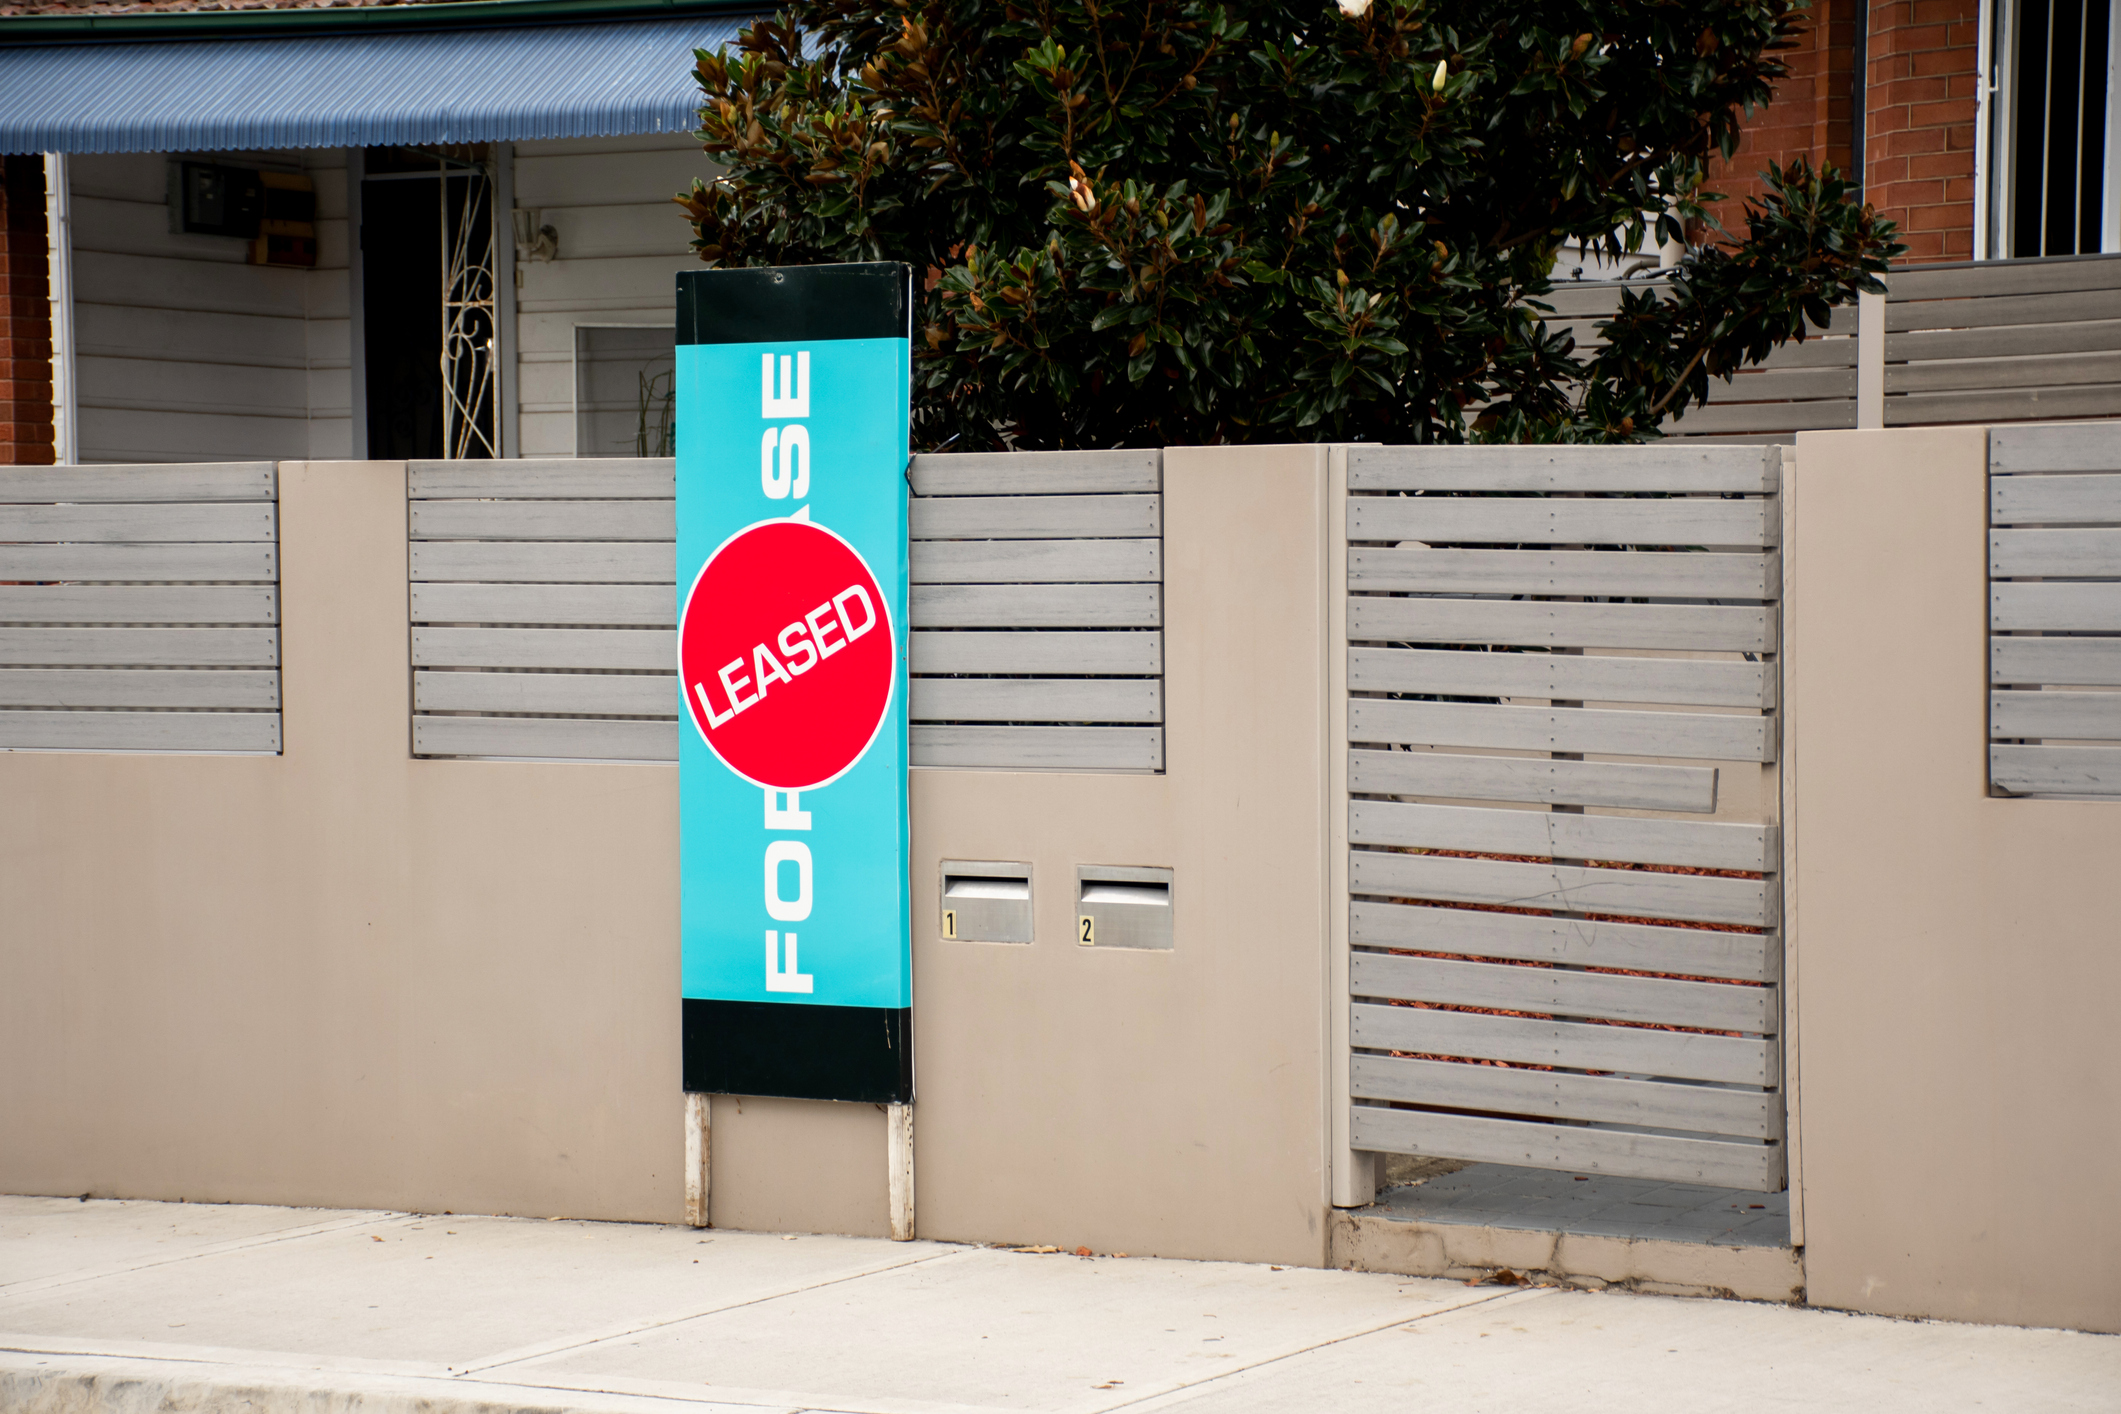 The median cost of renting reached a record high in December 2023. Credit: Credit:	Daria Nipot/Getty Images